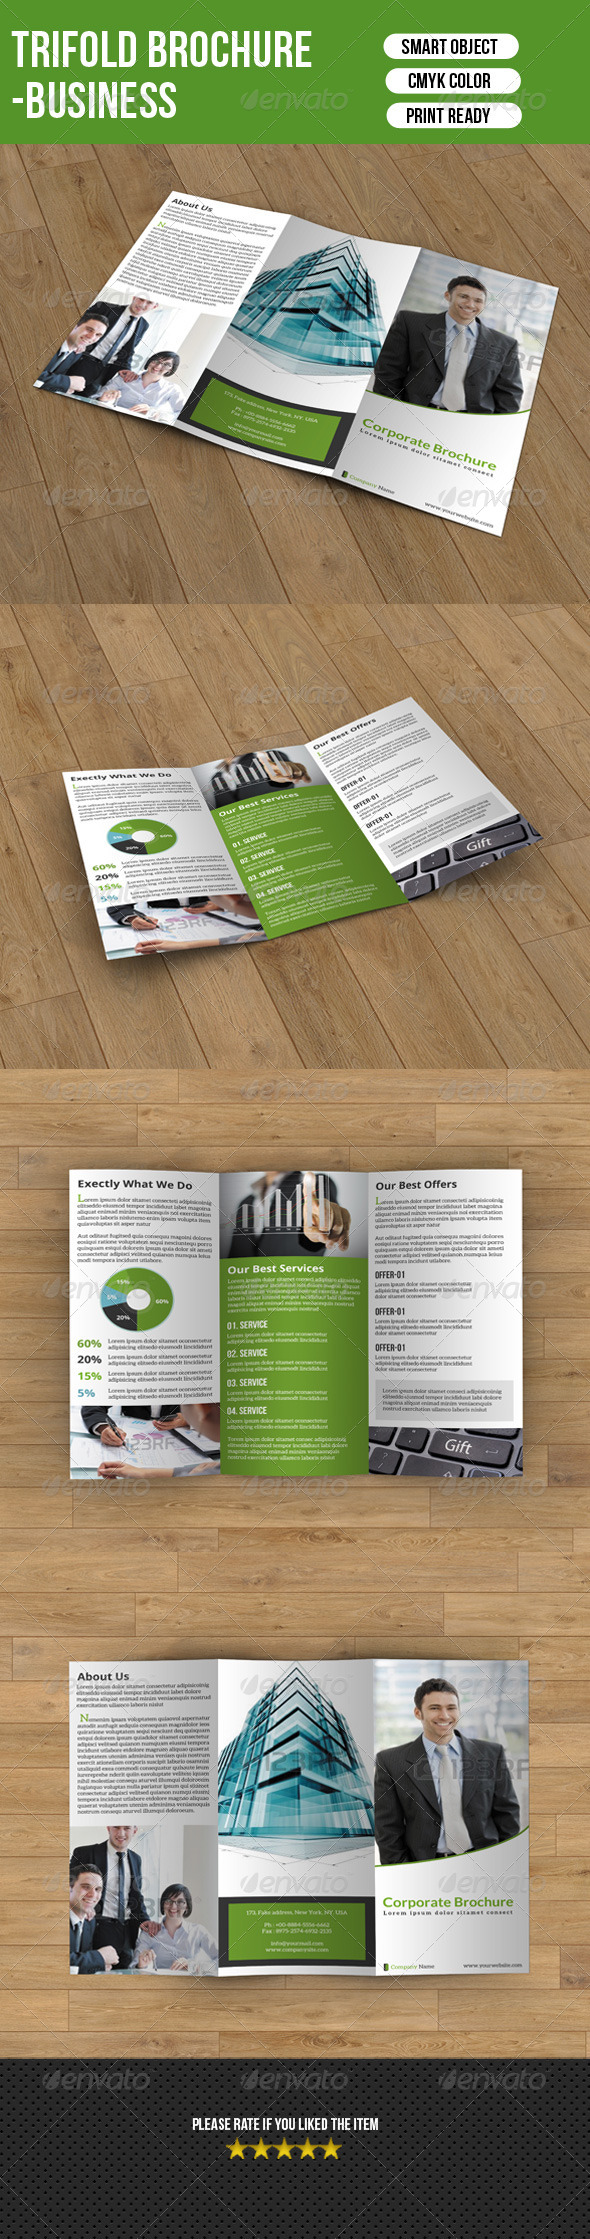 GraphicRiver Trifold Brochure-Business 7628985